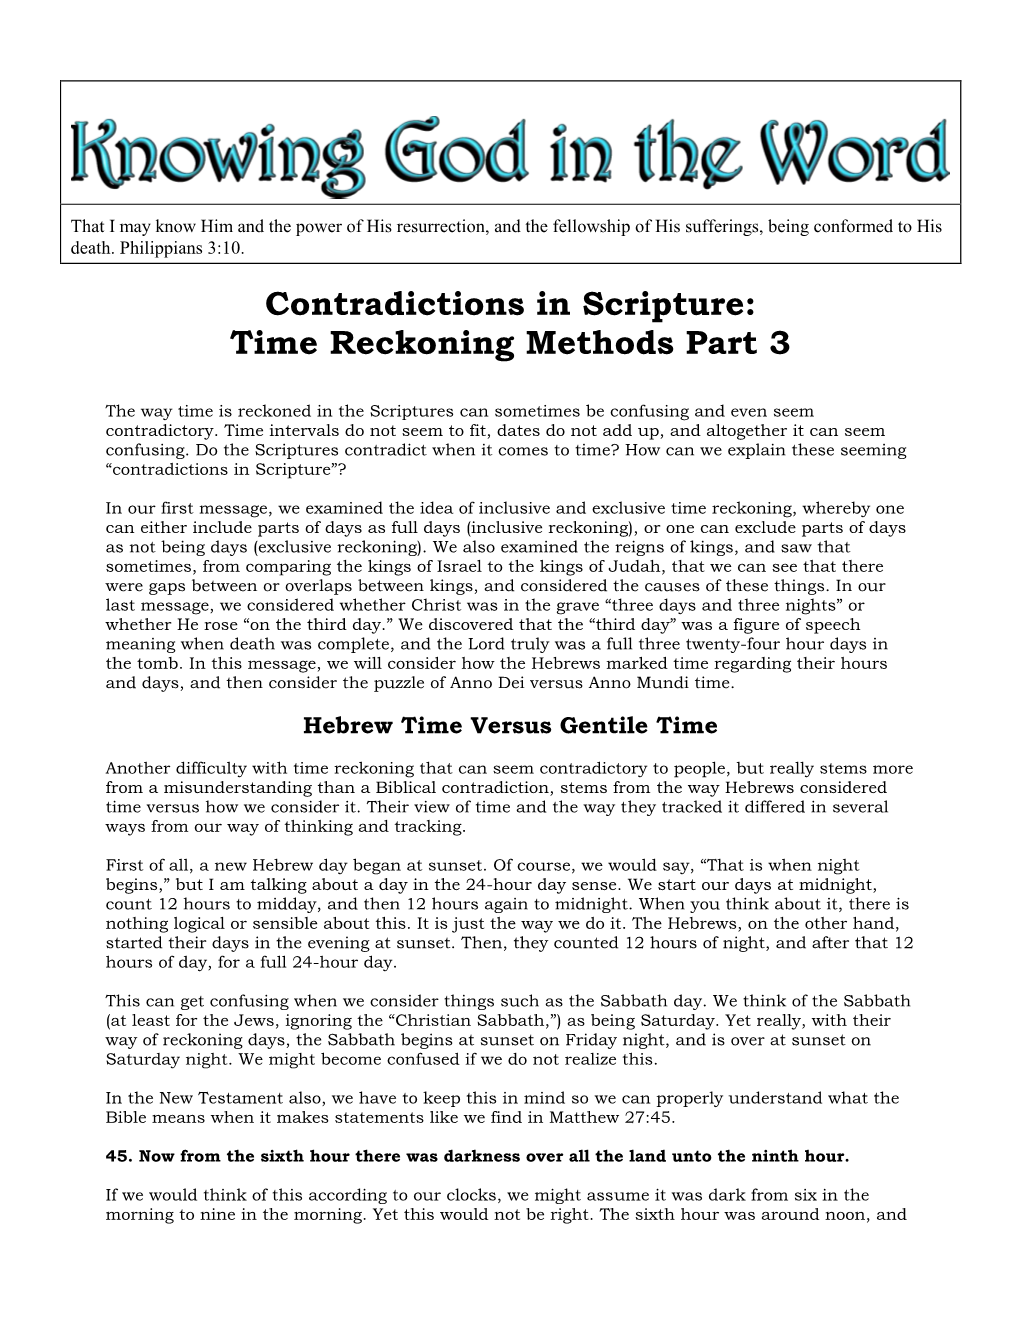 Contradictions in Scripture: Time Reckoning Methods Part 3